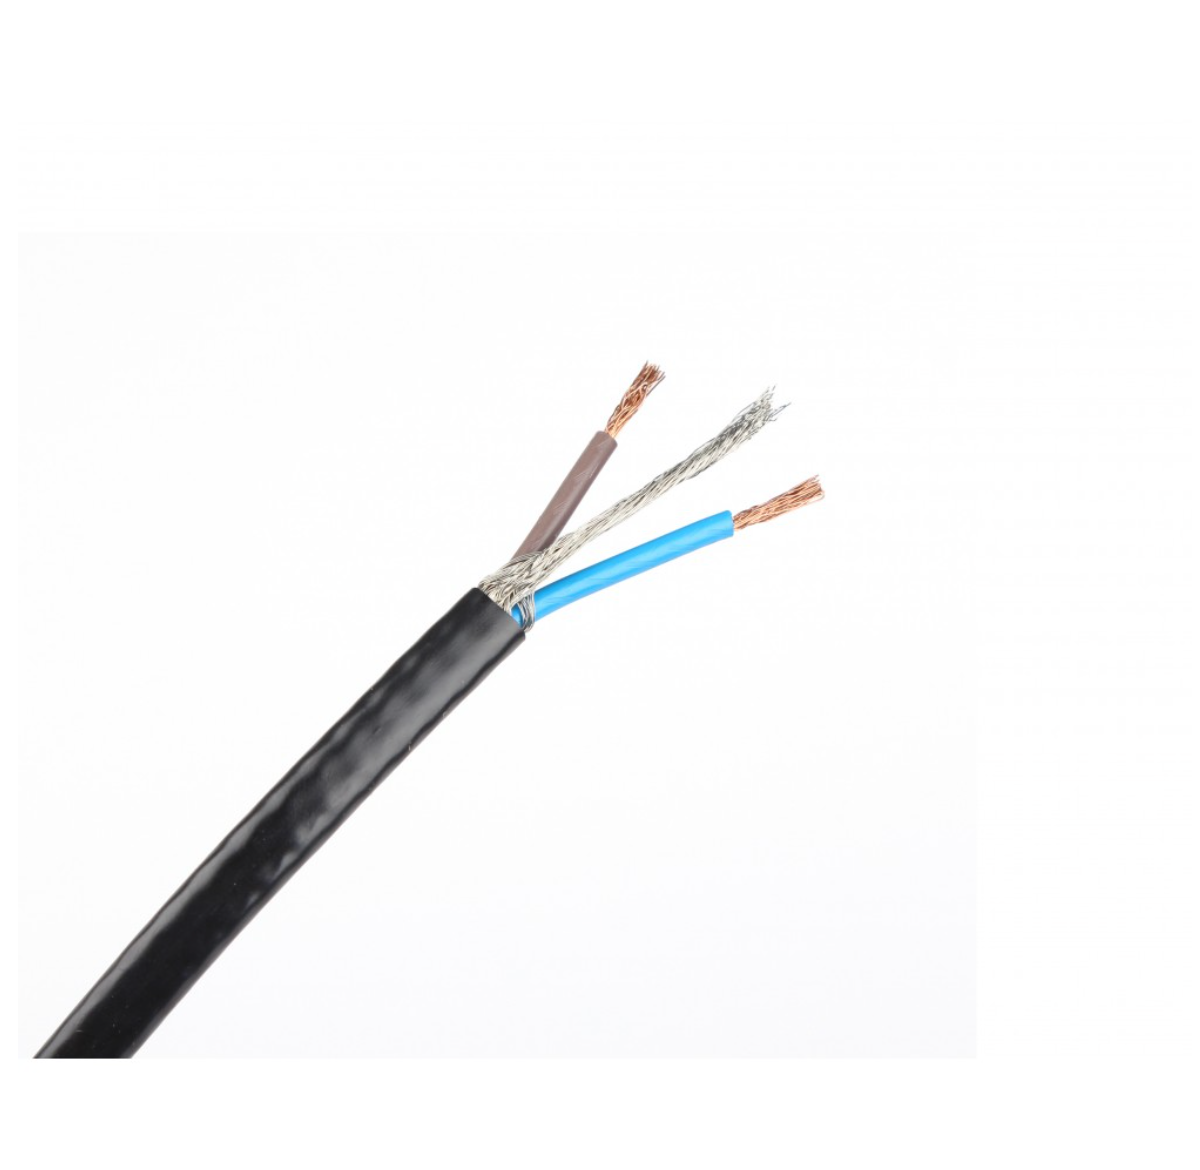 Heating cable - 10m